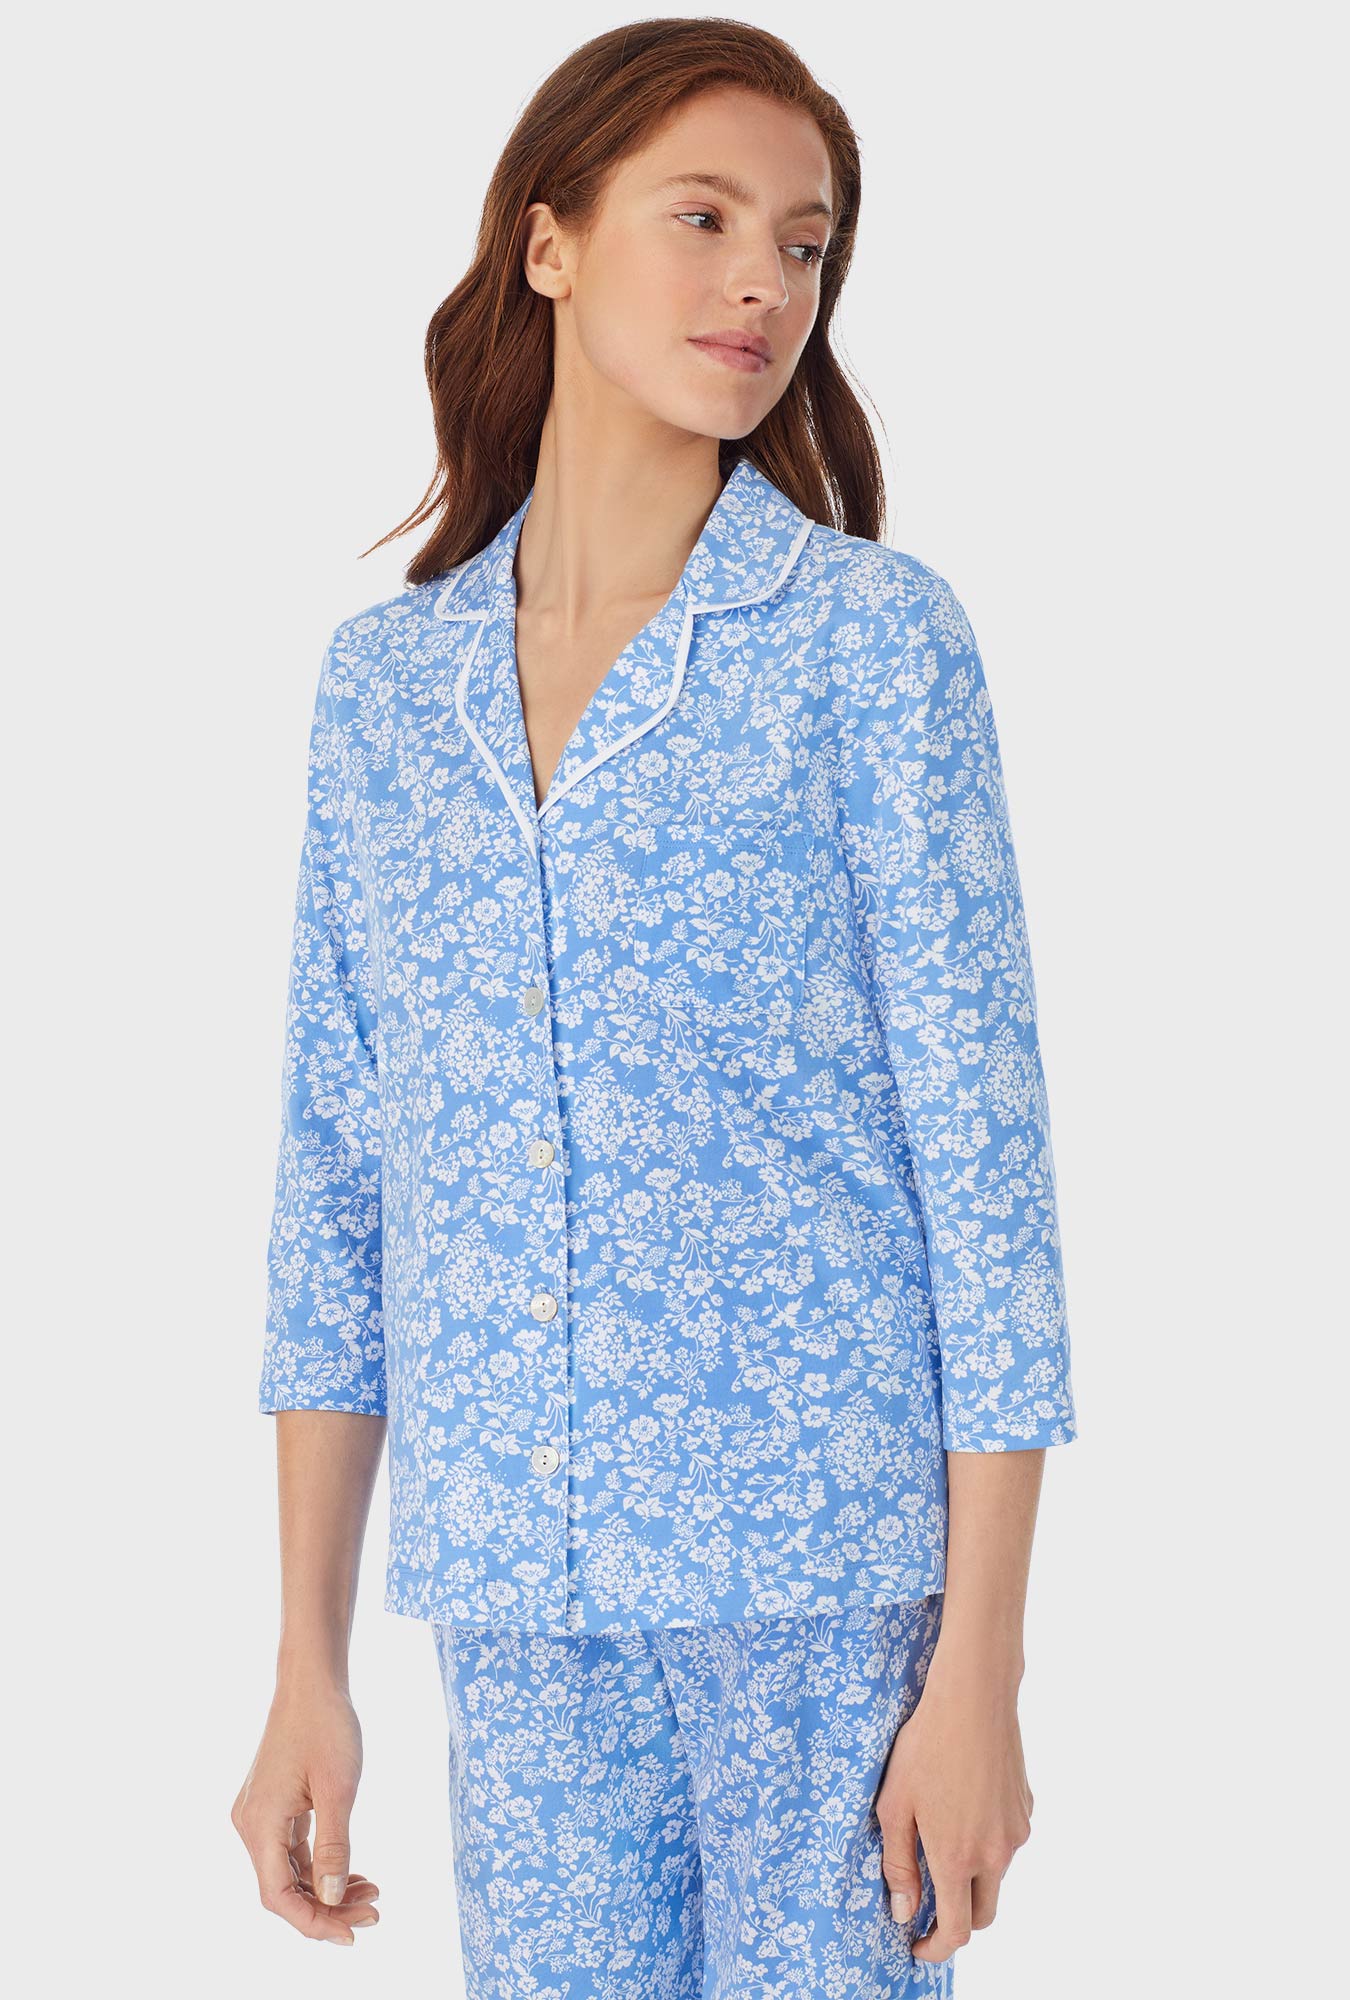 A lady wearing blue long pajama set with Cutout Floral  print